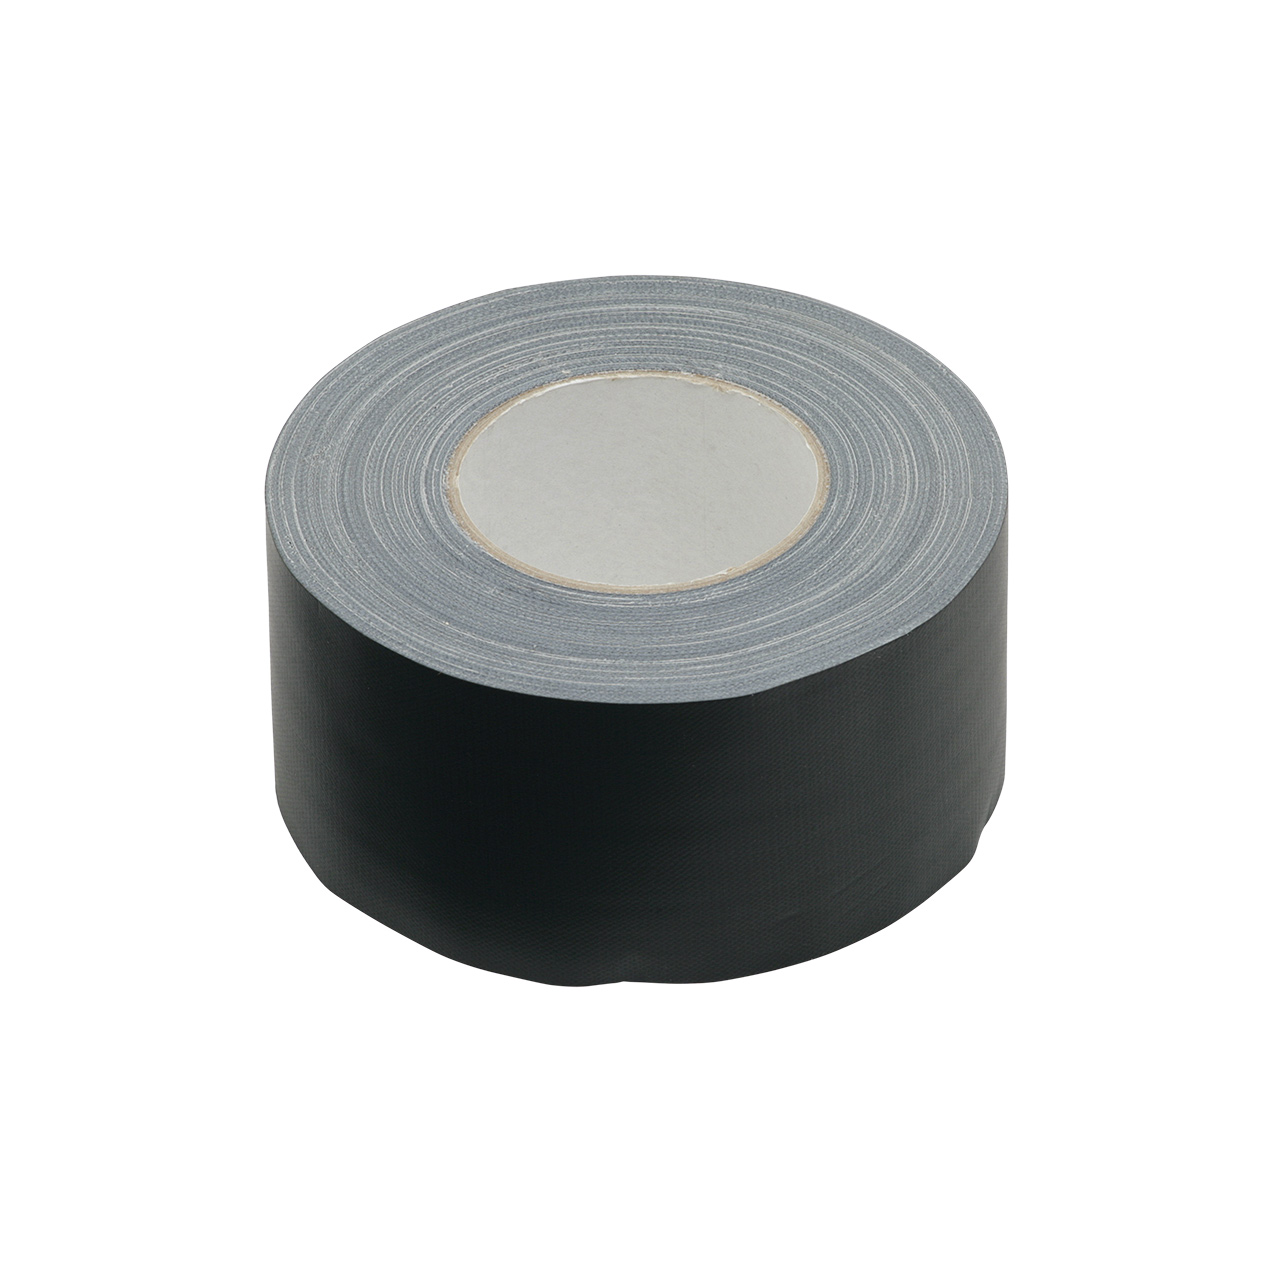 adhesive tape for fixing of fencing pistes, 50m, black